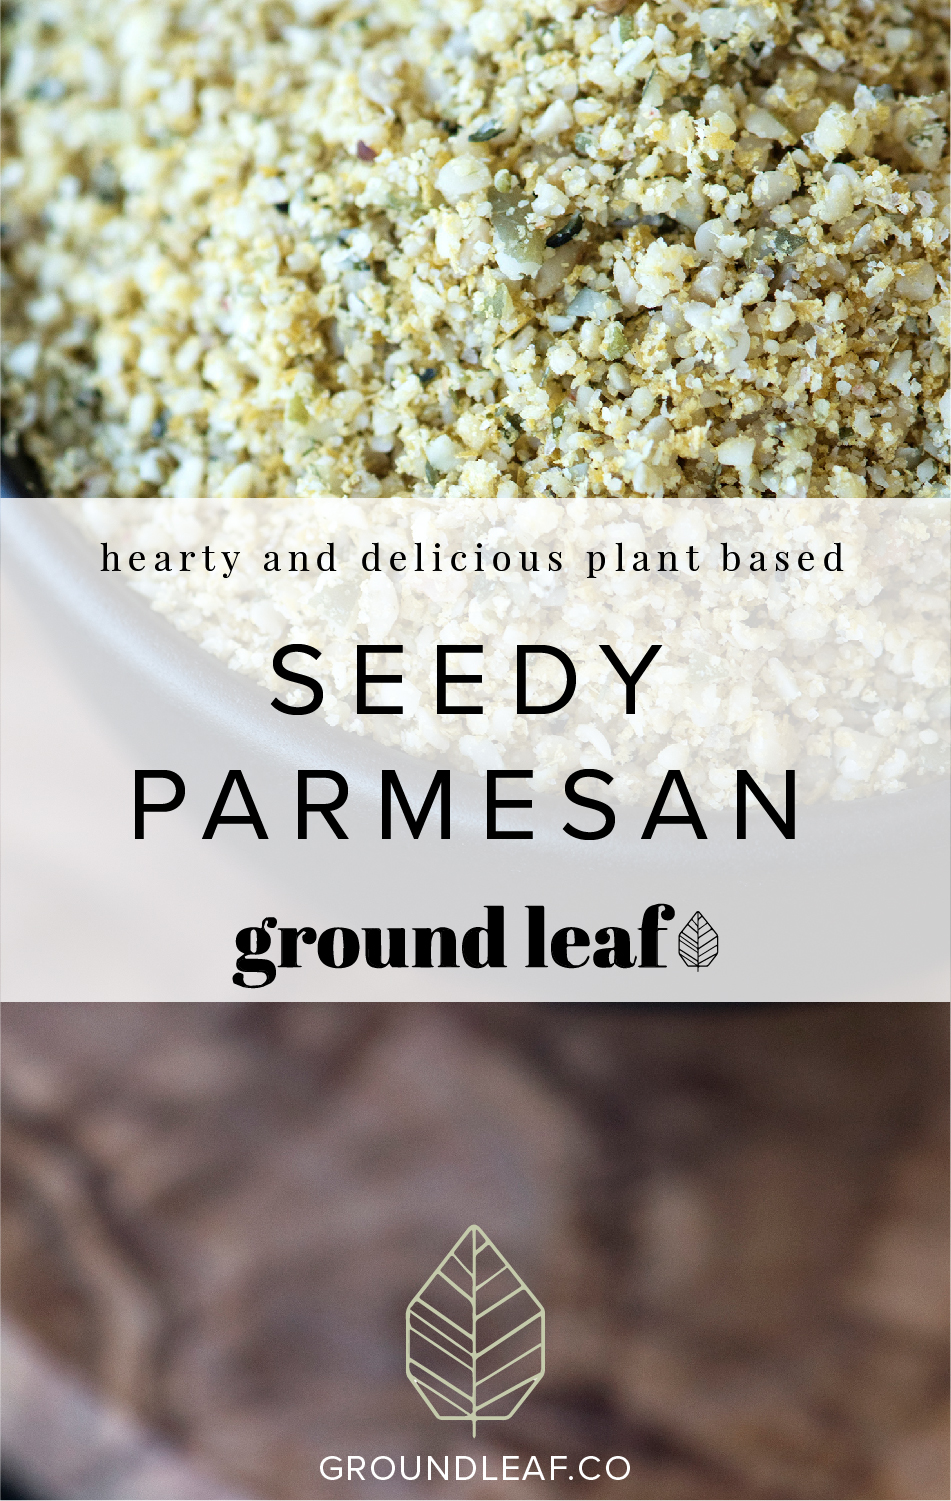 Seedy Parmesan is a perfect plant based option for achieving that wonderful cheesy flavor over pastas, veggies, soups, and more! If you have a seed allergy be sure to check out the Nutty version. | groundleaf.co